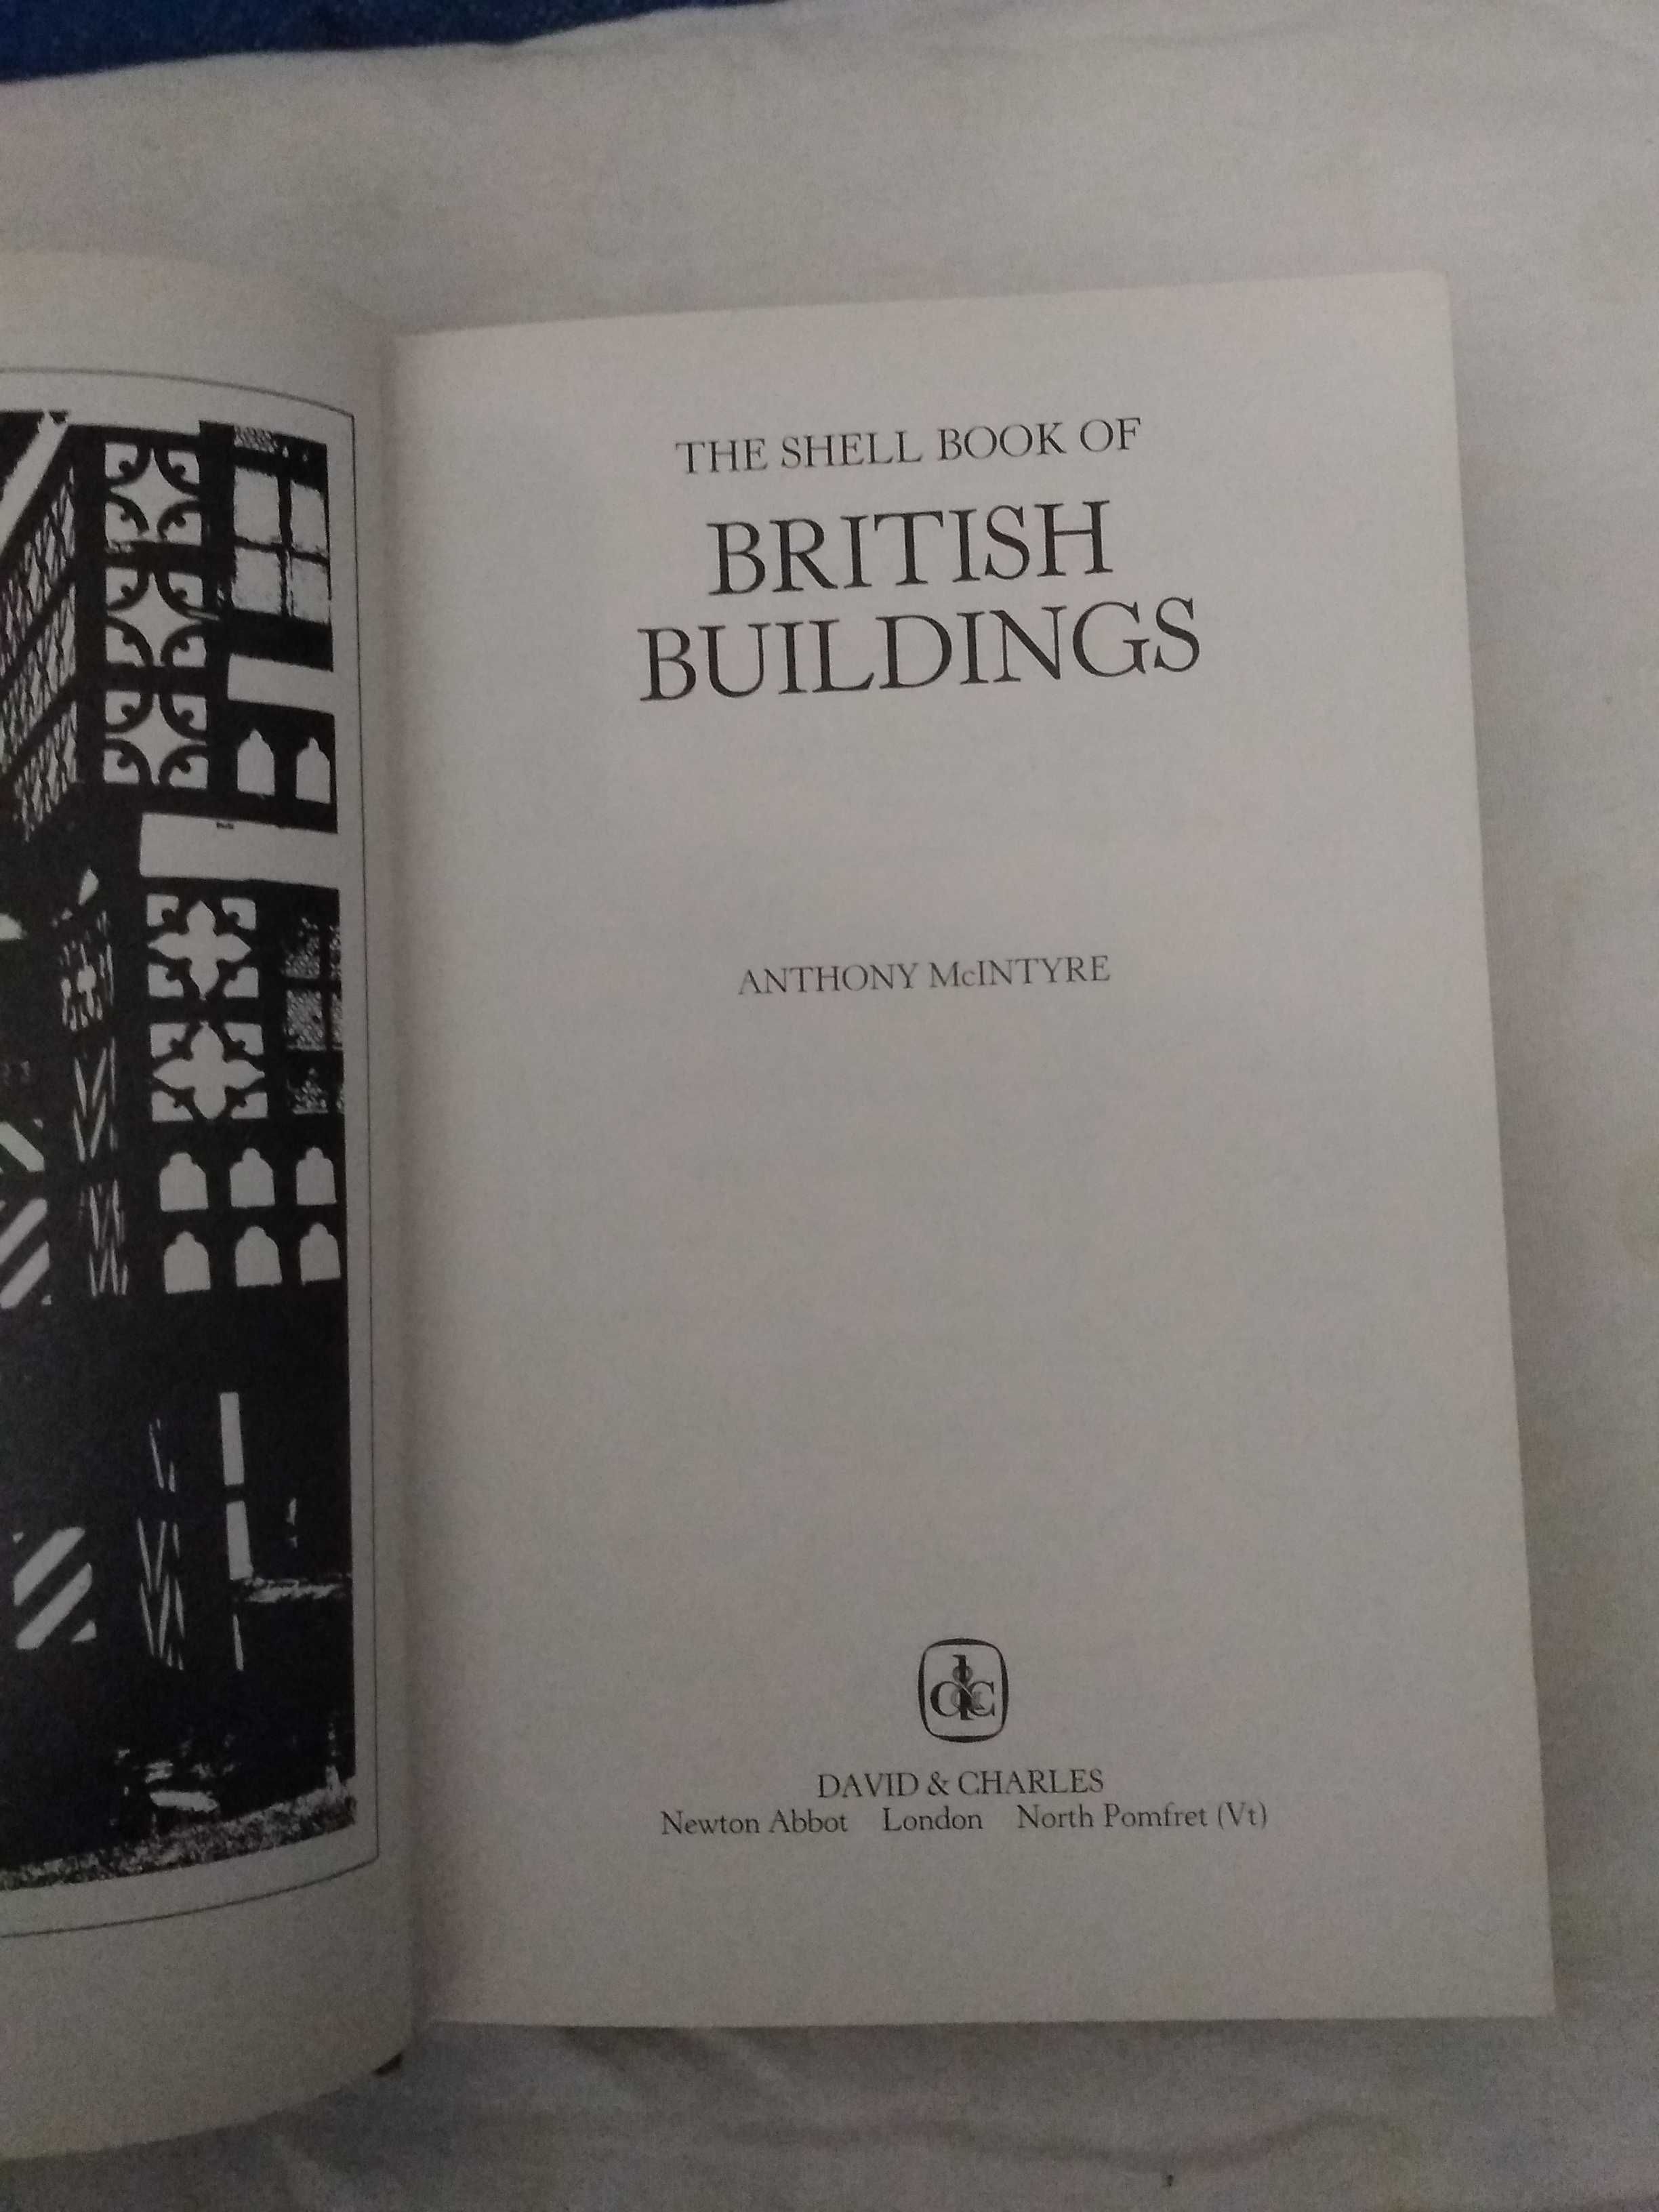 The Shell Book of British Buildings
by McIntyre, Anthony 1984